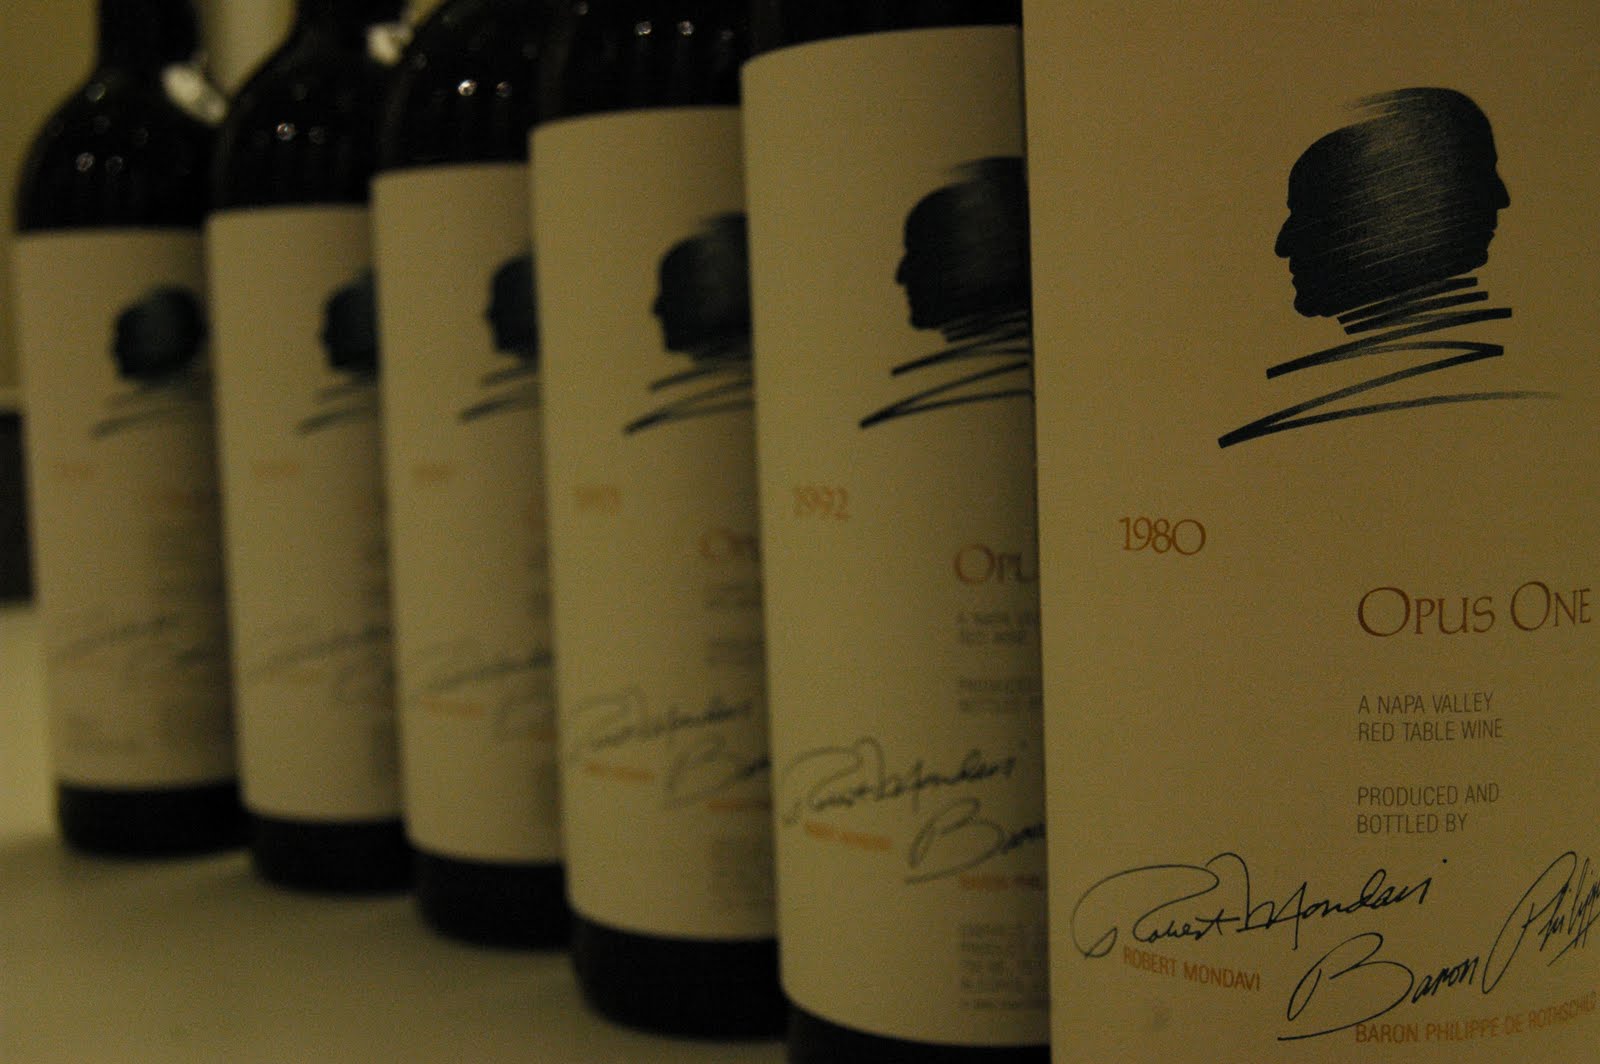 my wines and more: 1980 Opus One